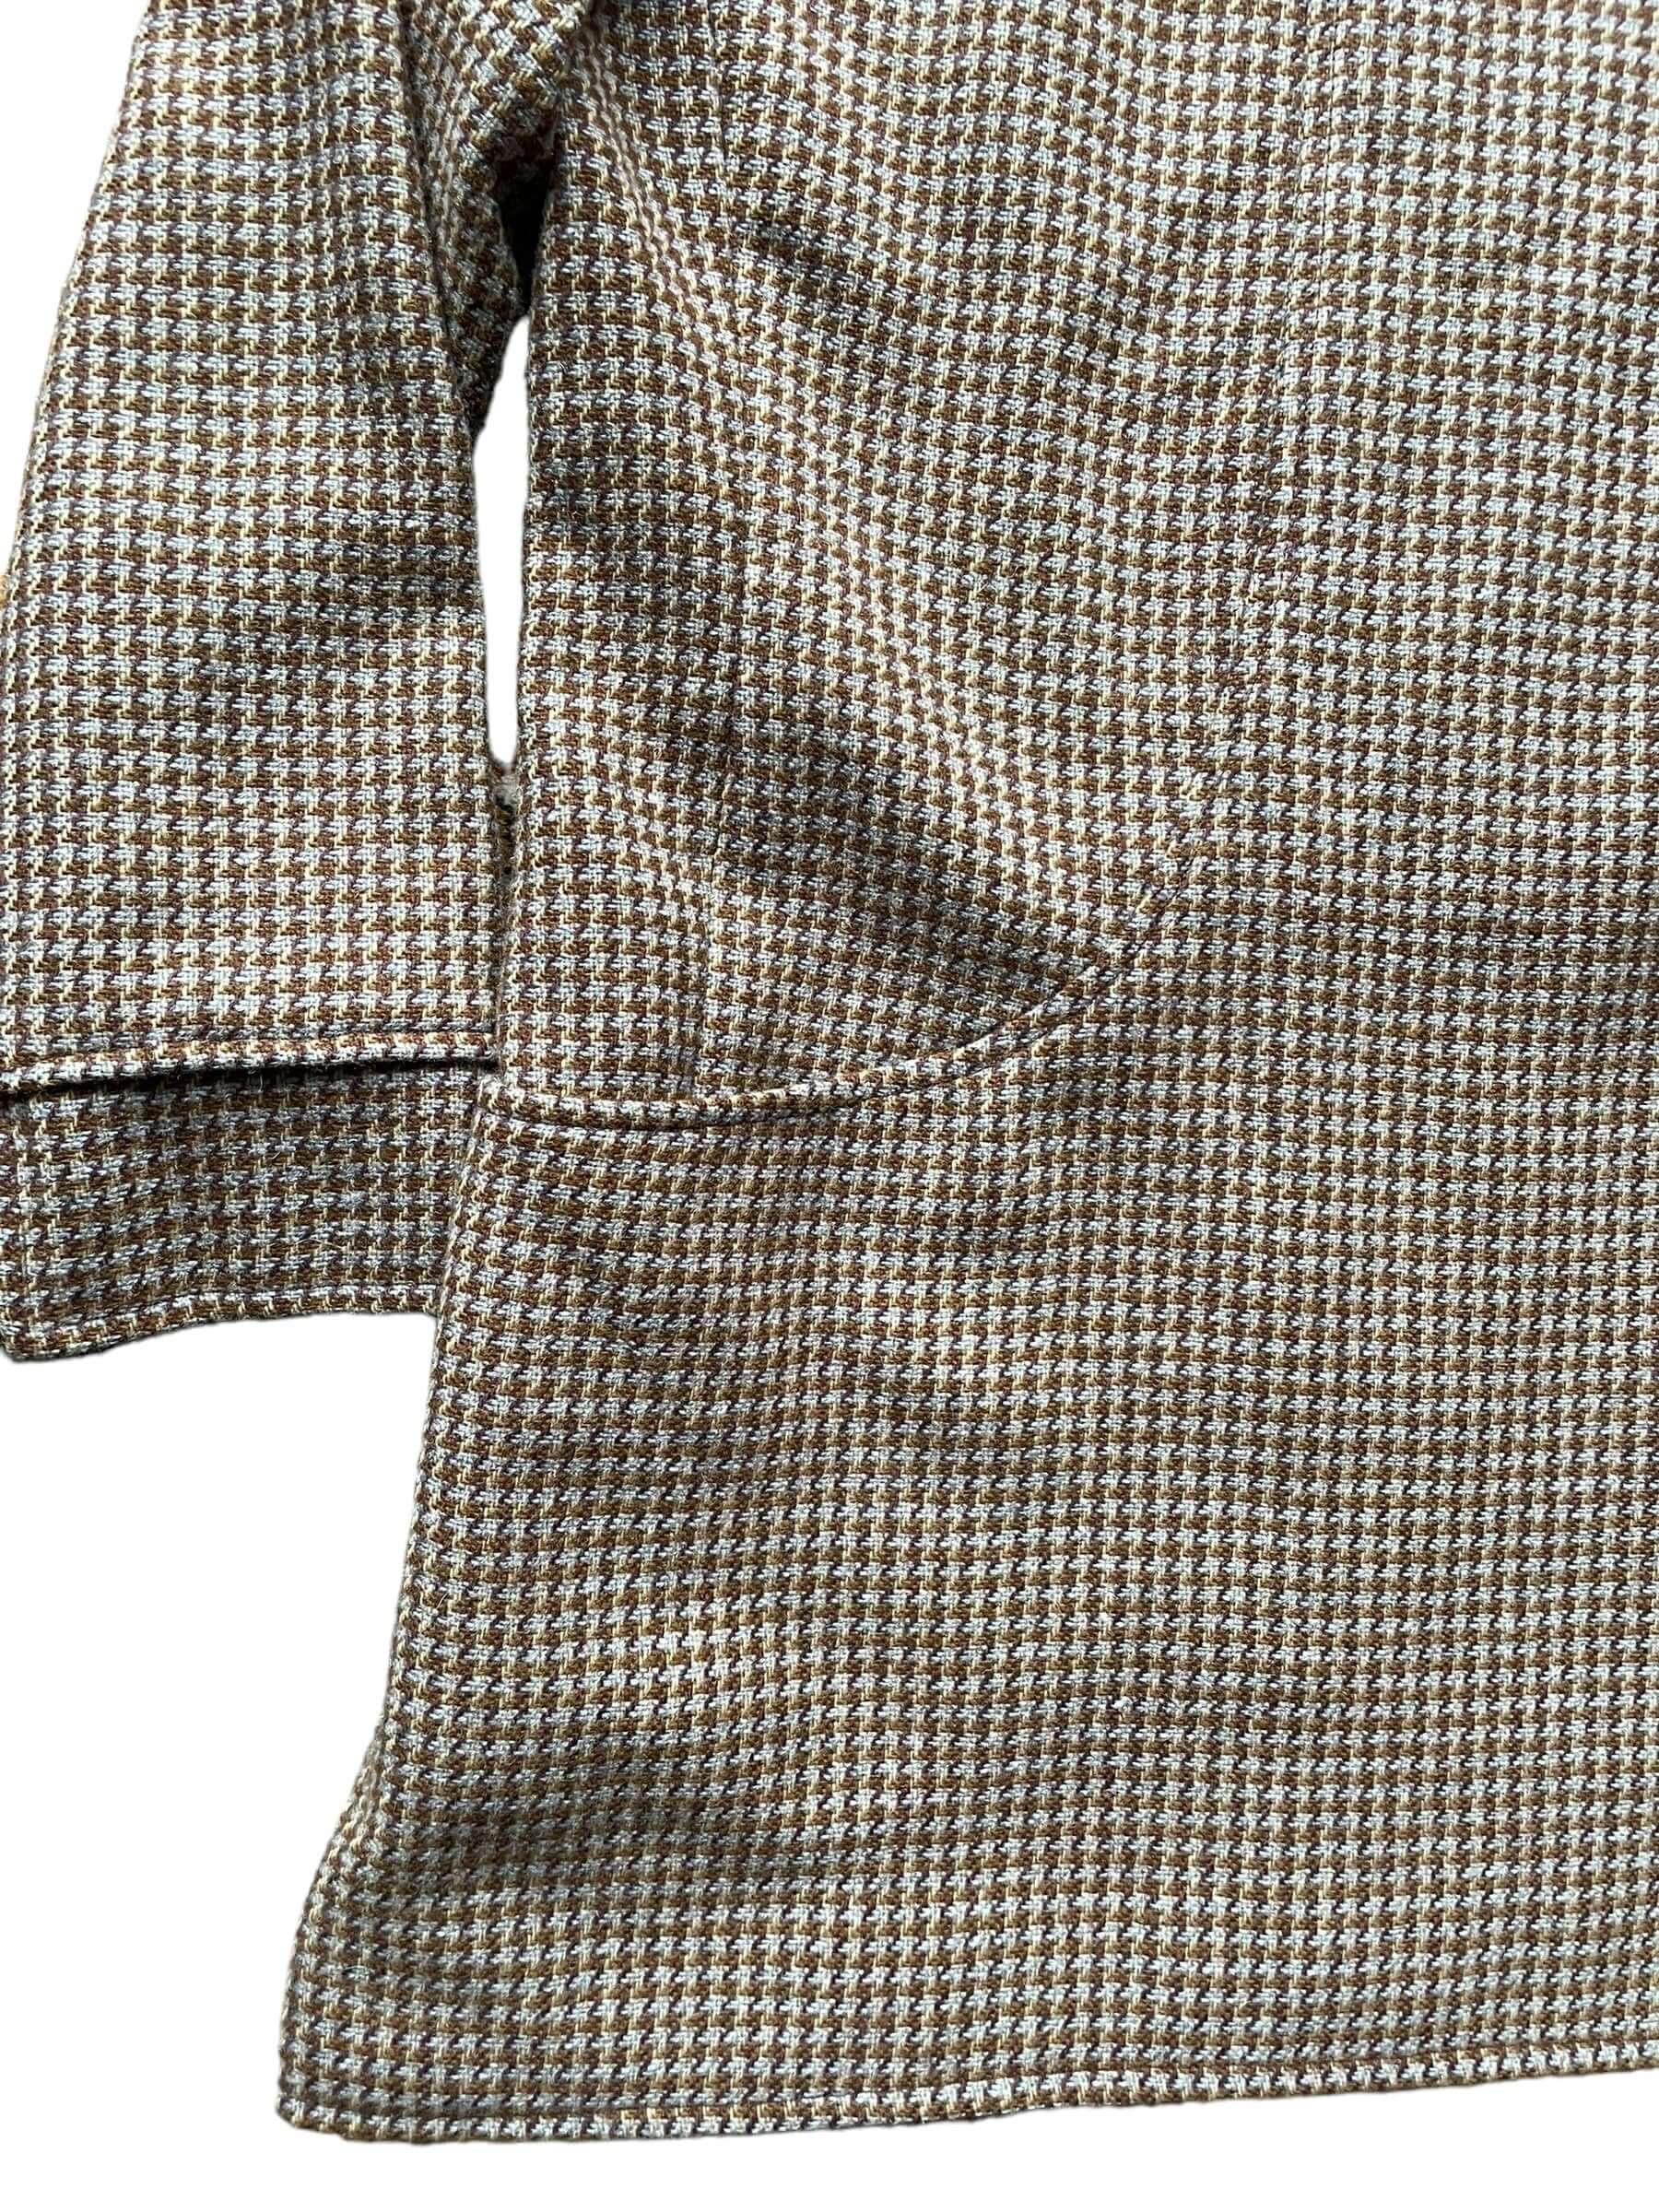 Lower right front view of Vintage 1950s Houndstooth Tunic | Vintage Ladies Clothing | Barn Owl True Vintage